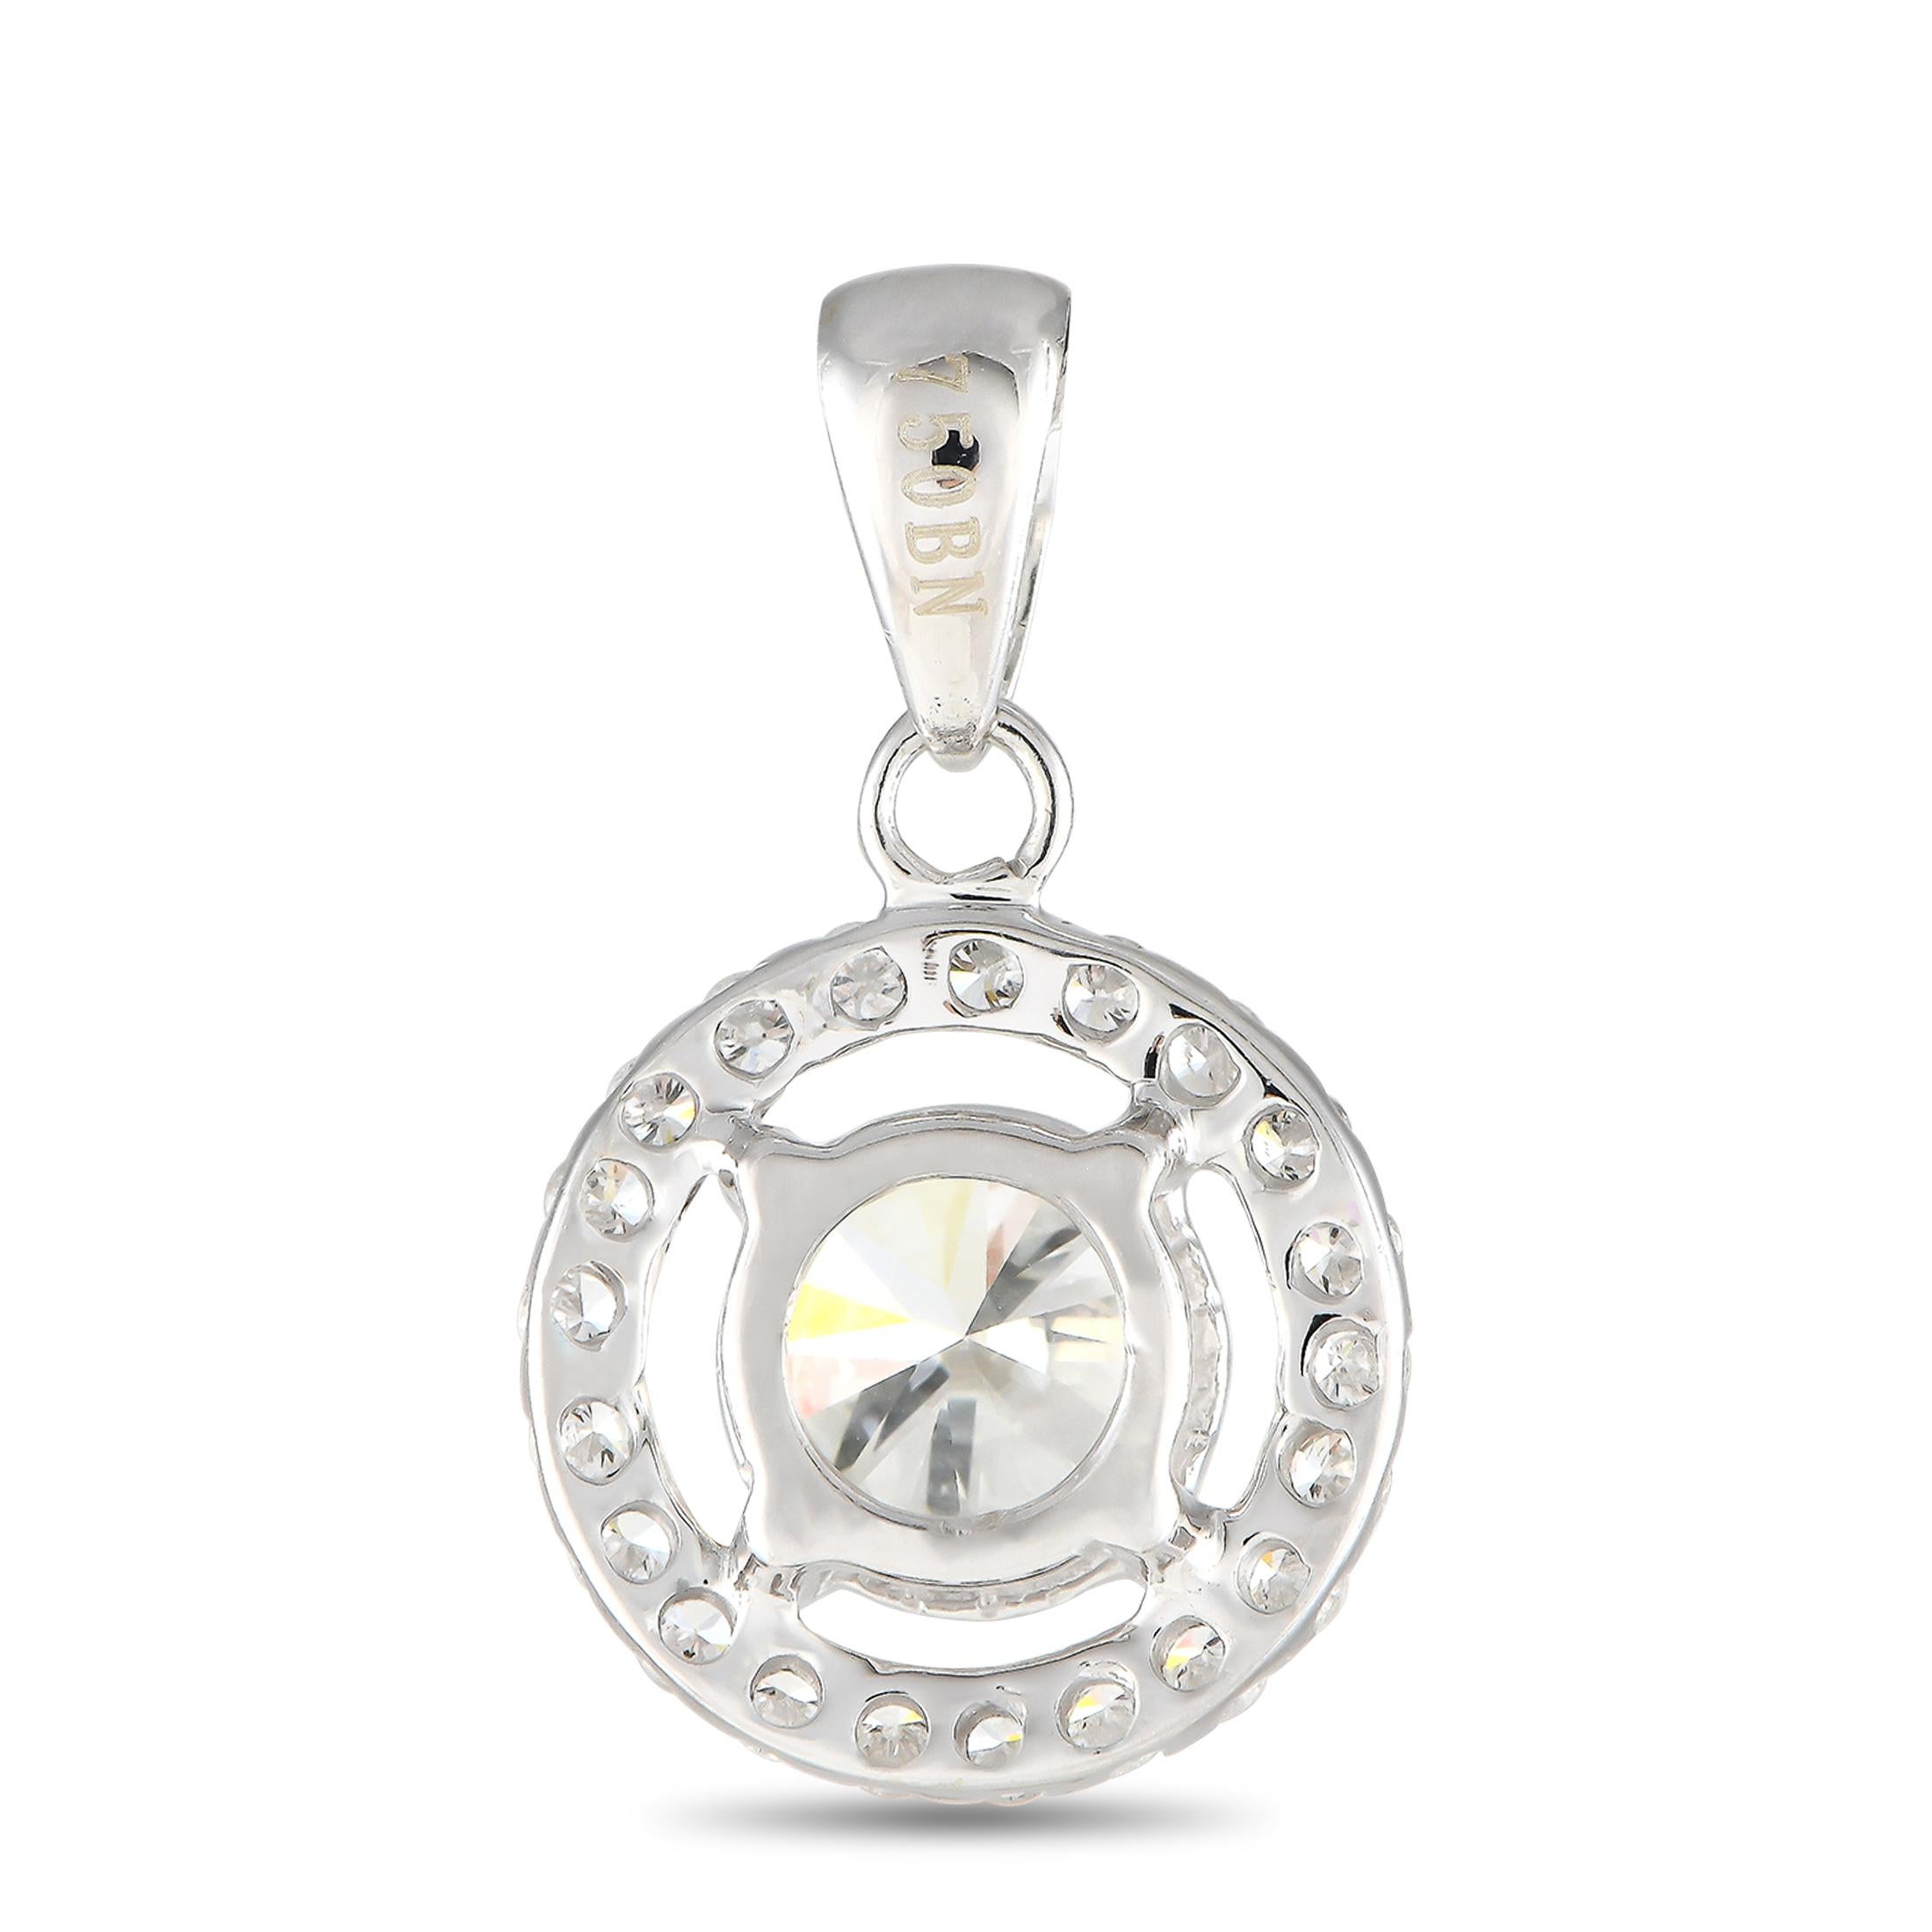 A classic piece to round out your jewelry wardrobe. This 18K white gold pendant features a 0.55-carat round diamond centerstone, surrounded by a circular frame of petite diamonds totaling 0.18 carats. The pendant measures 0.65 x 0.45 and is held by